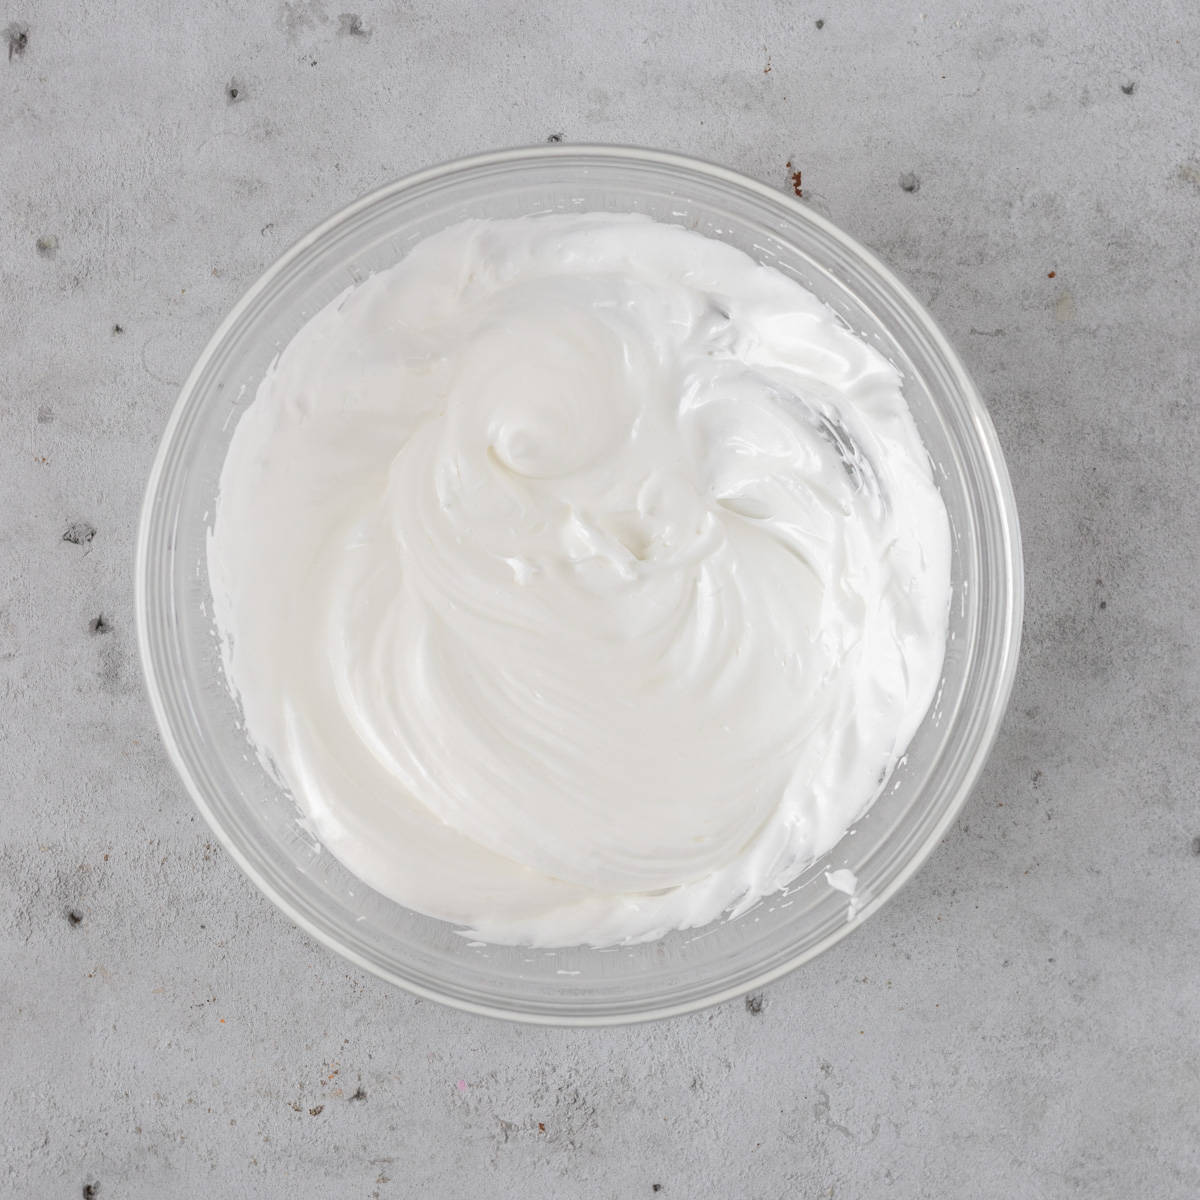 the french meringue in a glass bowl on a grey background.